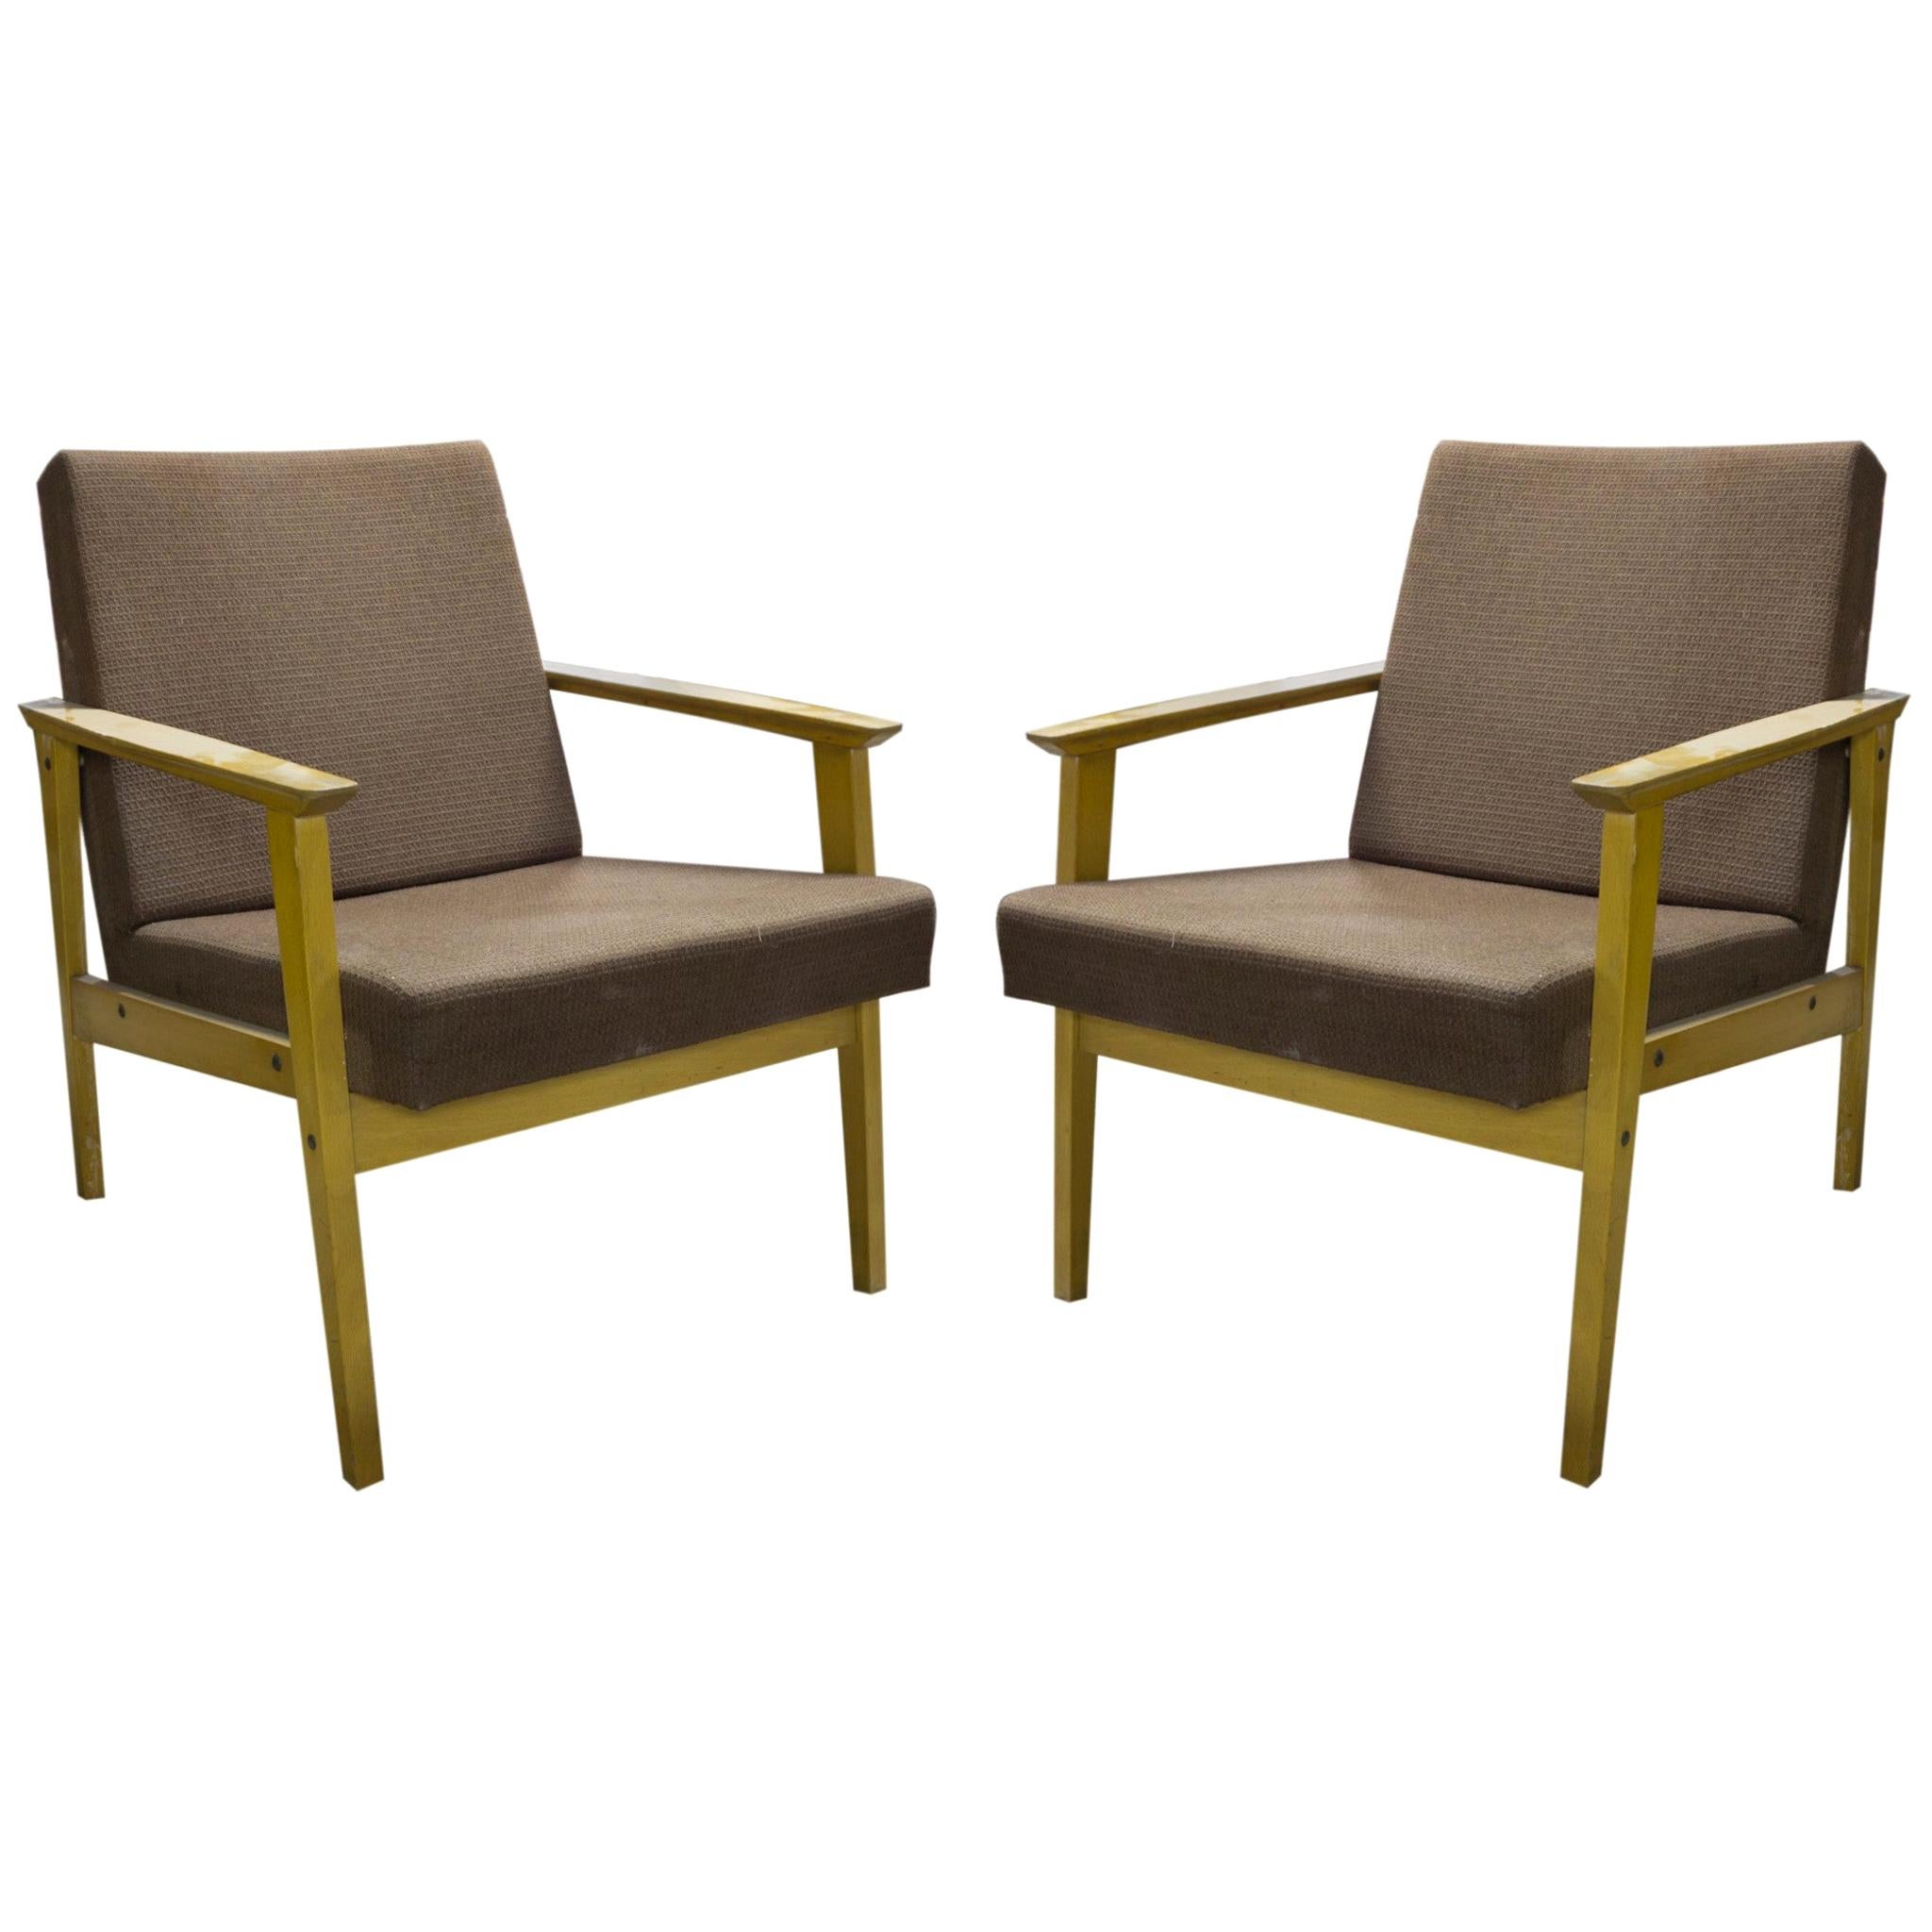 Midcentury Armchairs, Produced by TON Company, 1960s, Czechoslovakia For Sale